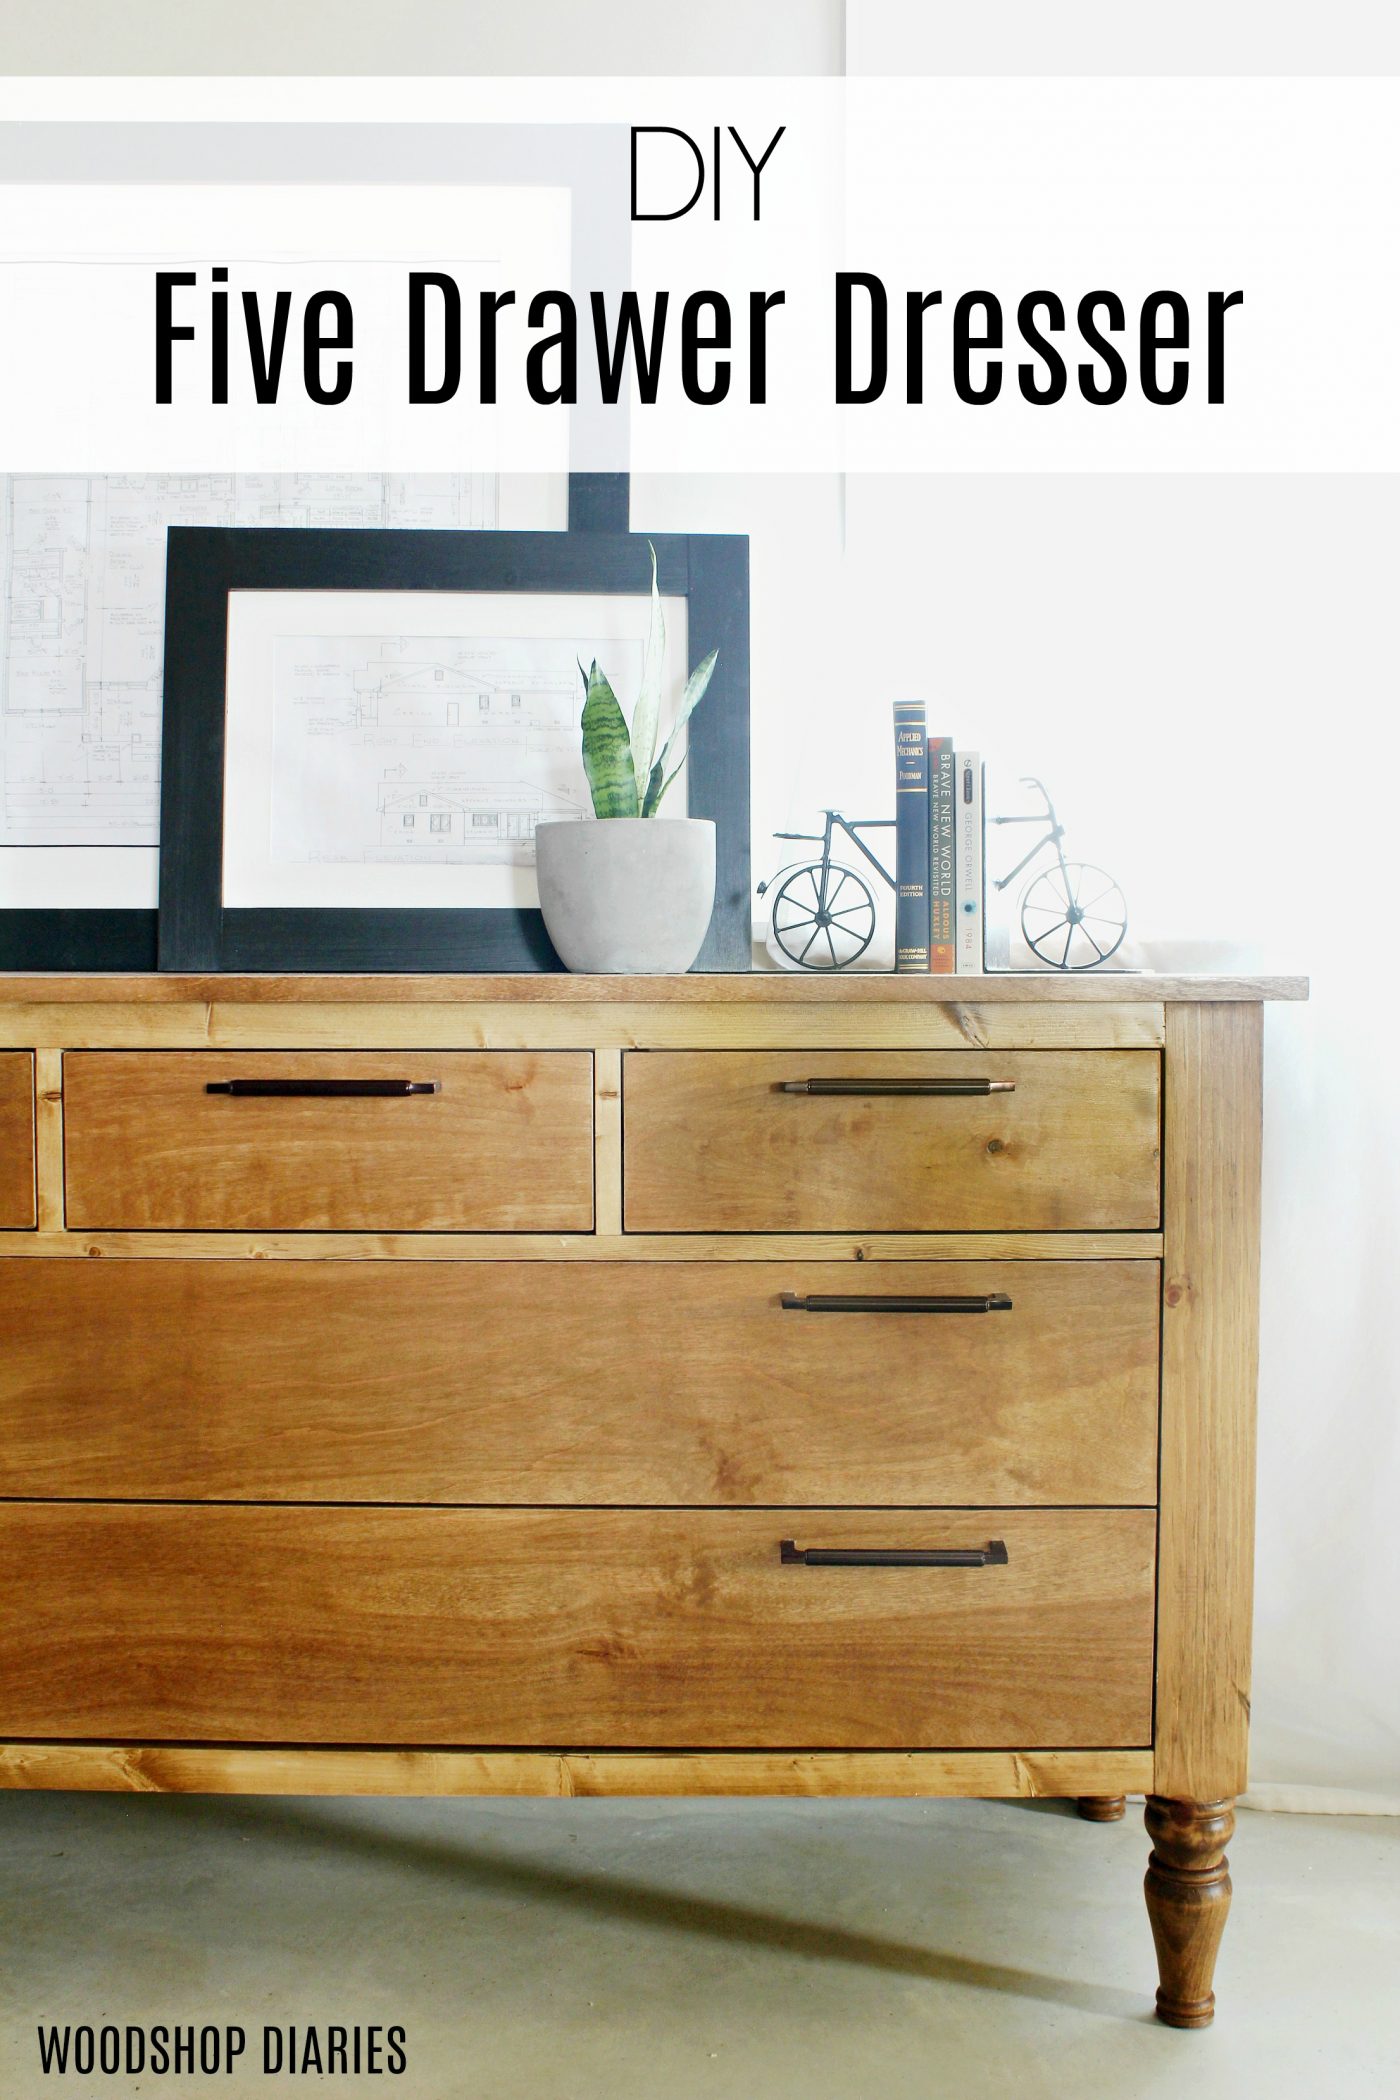 Build Your Own Diy Dresser Step By, Build Your Own Dresser